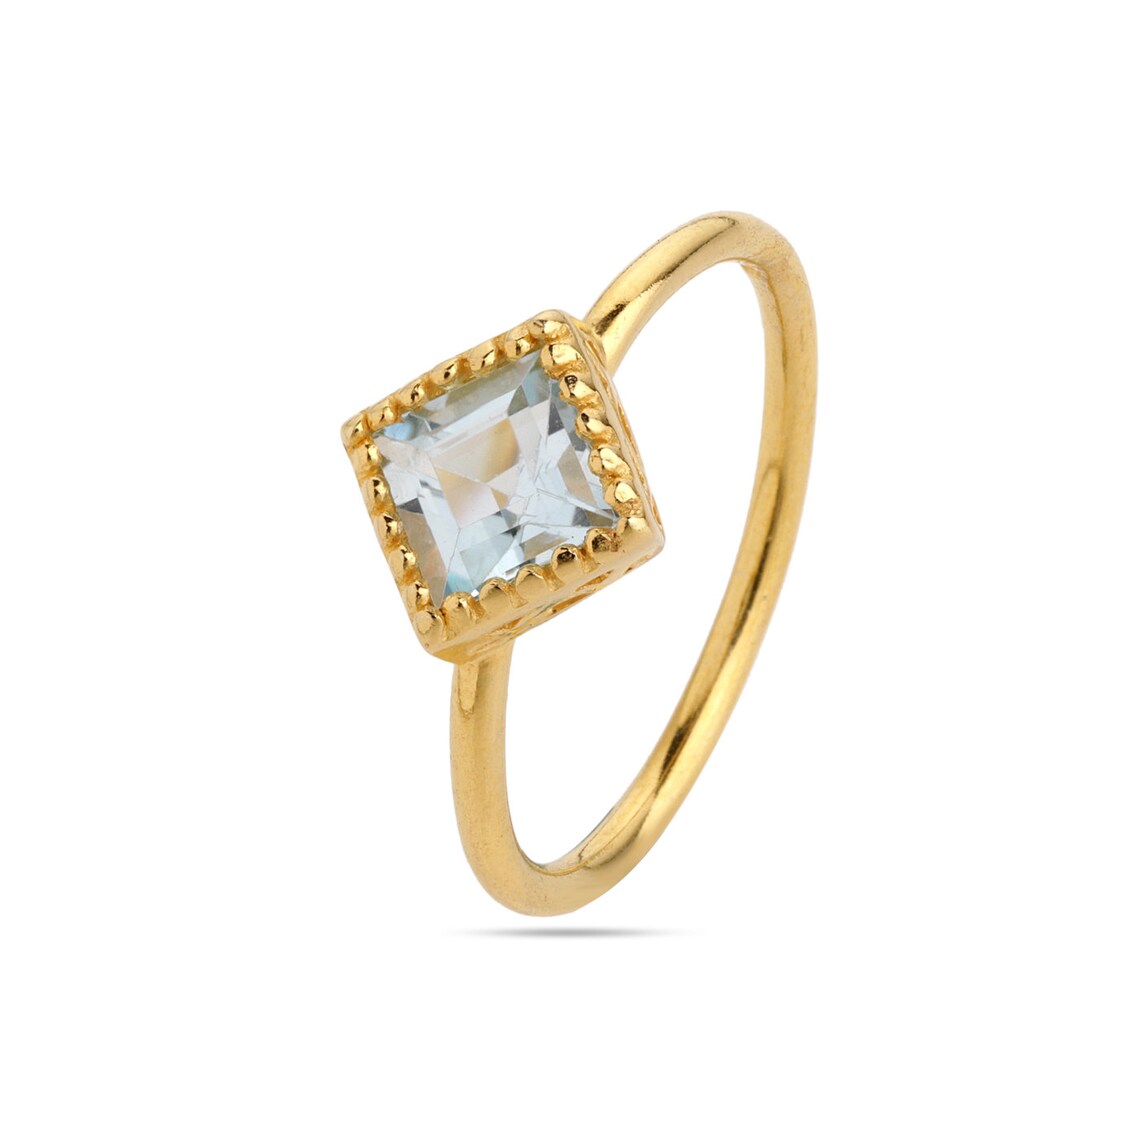 Swiss Blue Topaz Gold Ring - Blue Stone Ring - Something Blue - Topaz - Square shaped blue stone - Solid Silver - custom ring sizes